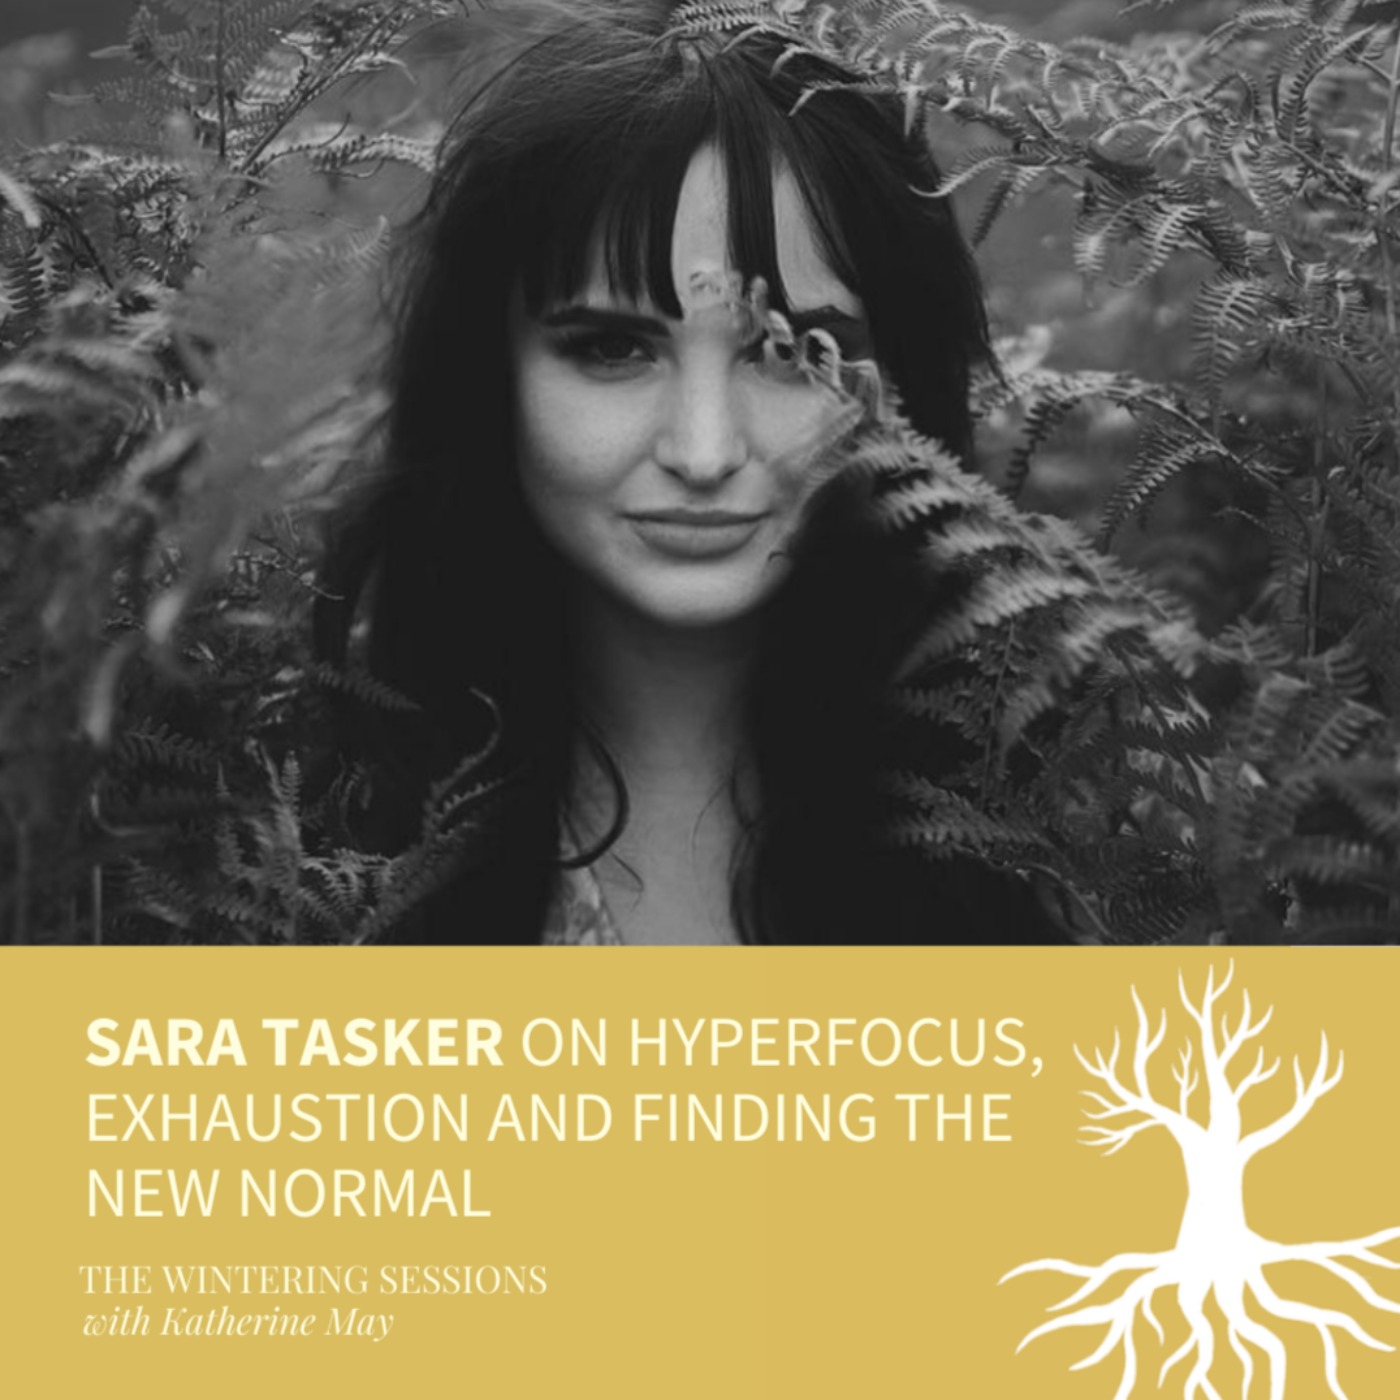 Sara Tasker on hyperfocus, exhaustion and finding the new normal